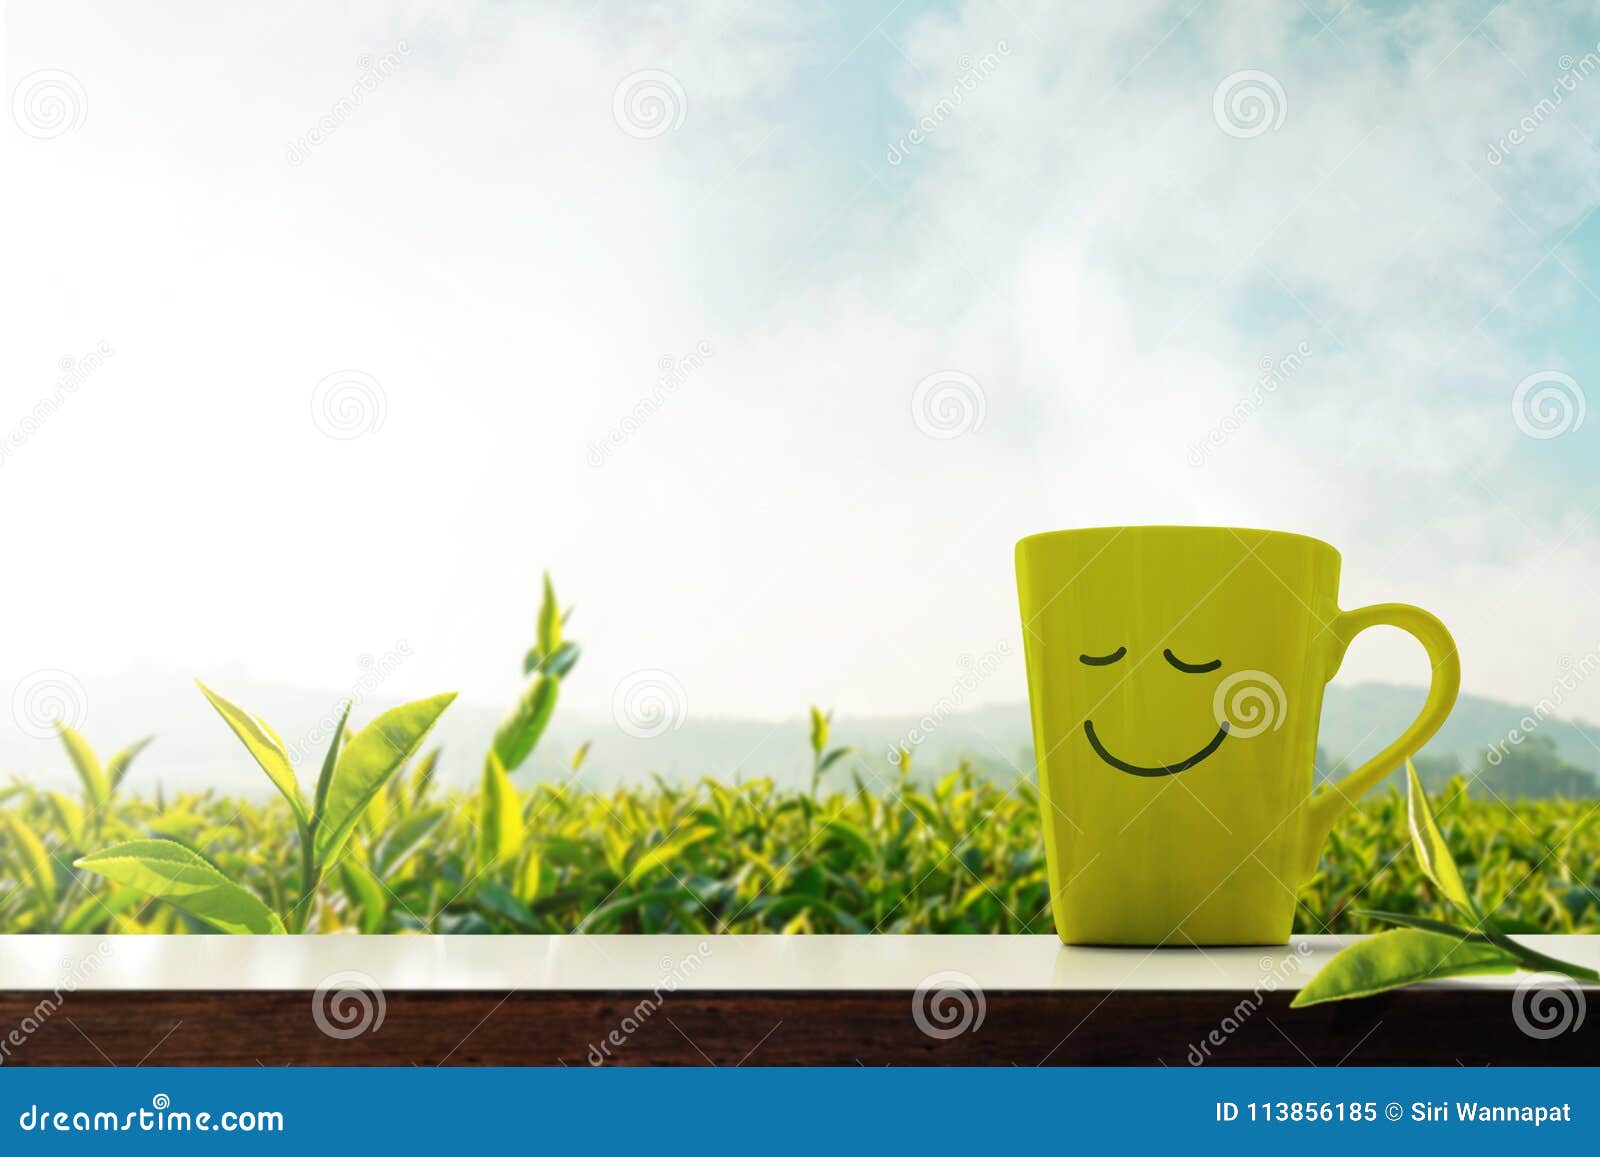 happy and relaxation concept. a cup of hot tea with smiley face